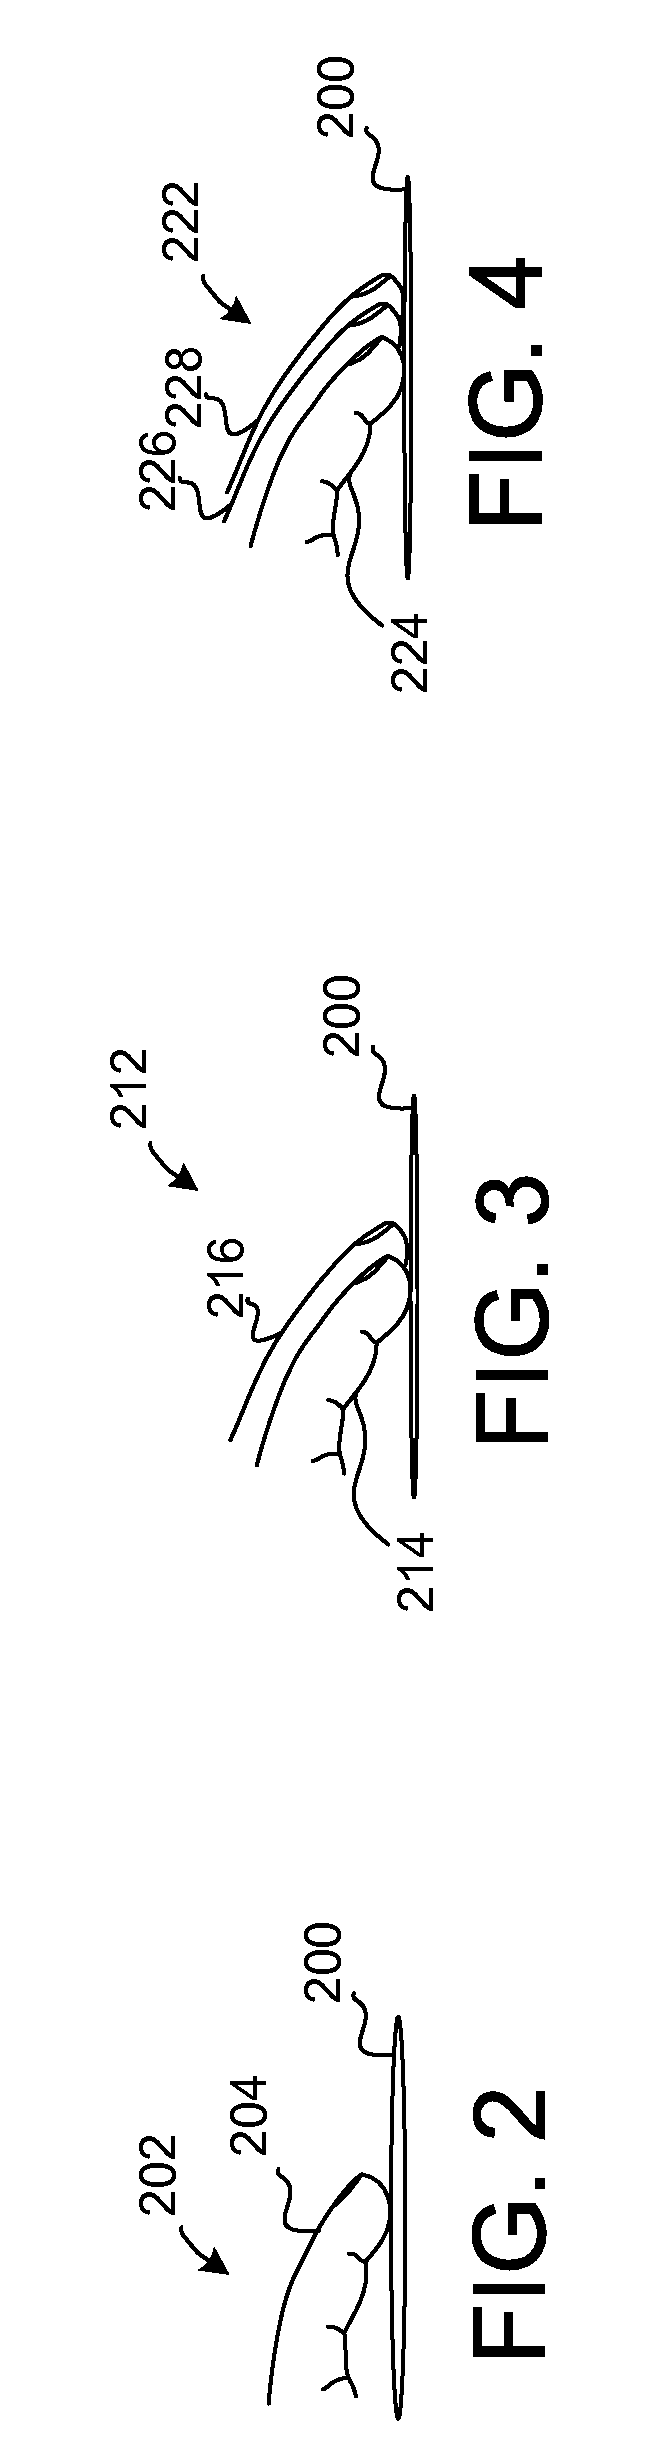 Proximity sensor and method for indicating extended interface results